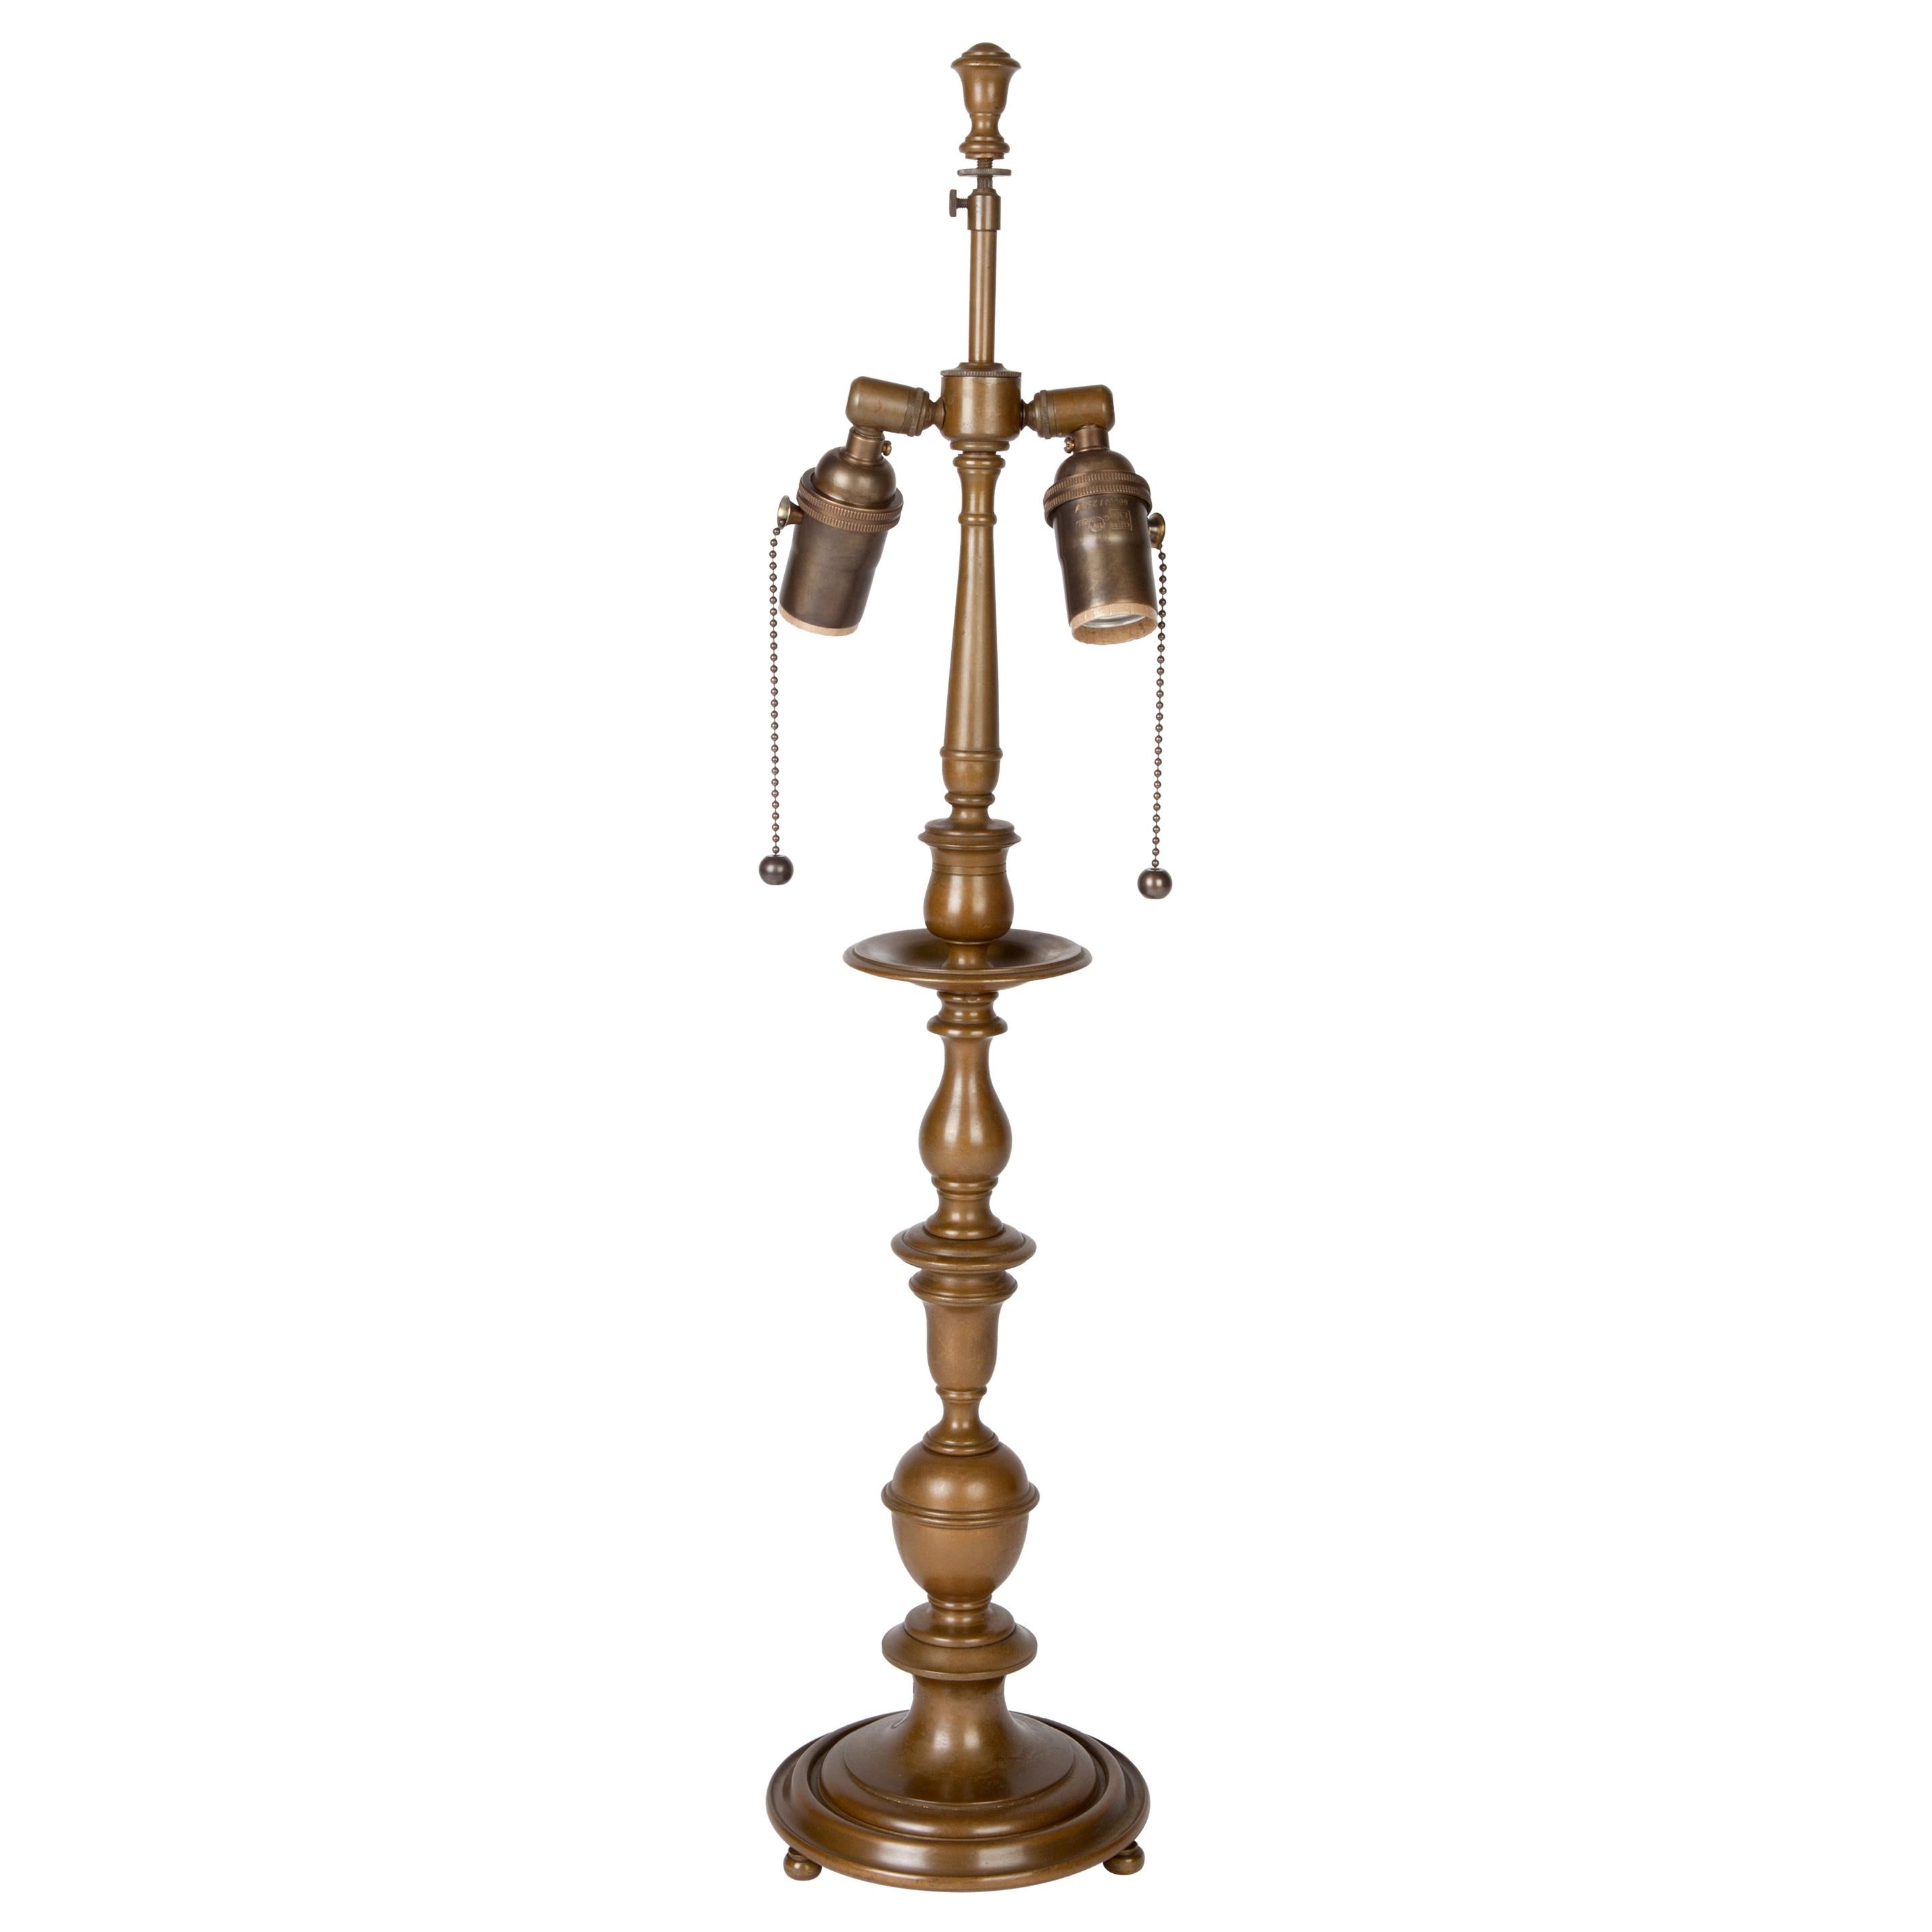 Antique Bronze Baroque Library Desk Lamp Signed by Edward F. Caldwell Circa 1950 For Sale